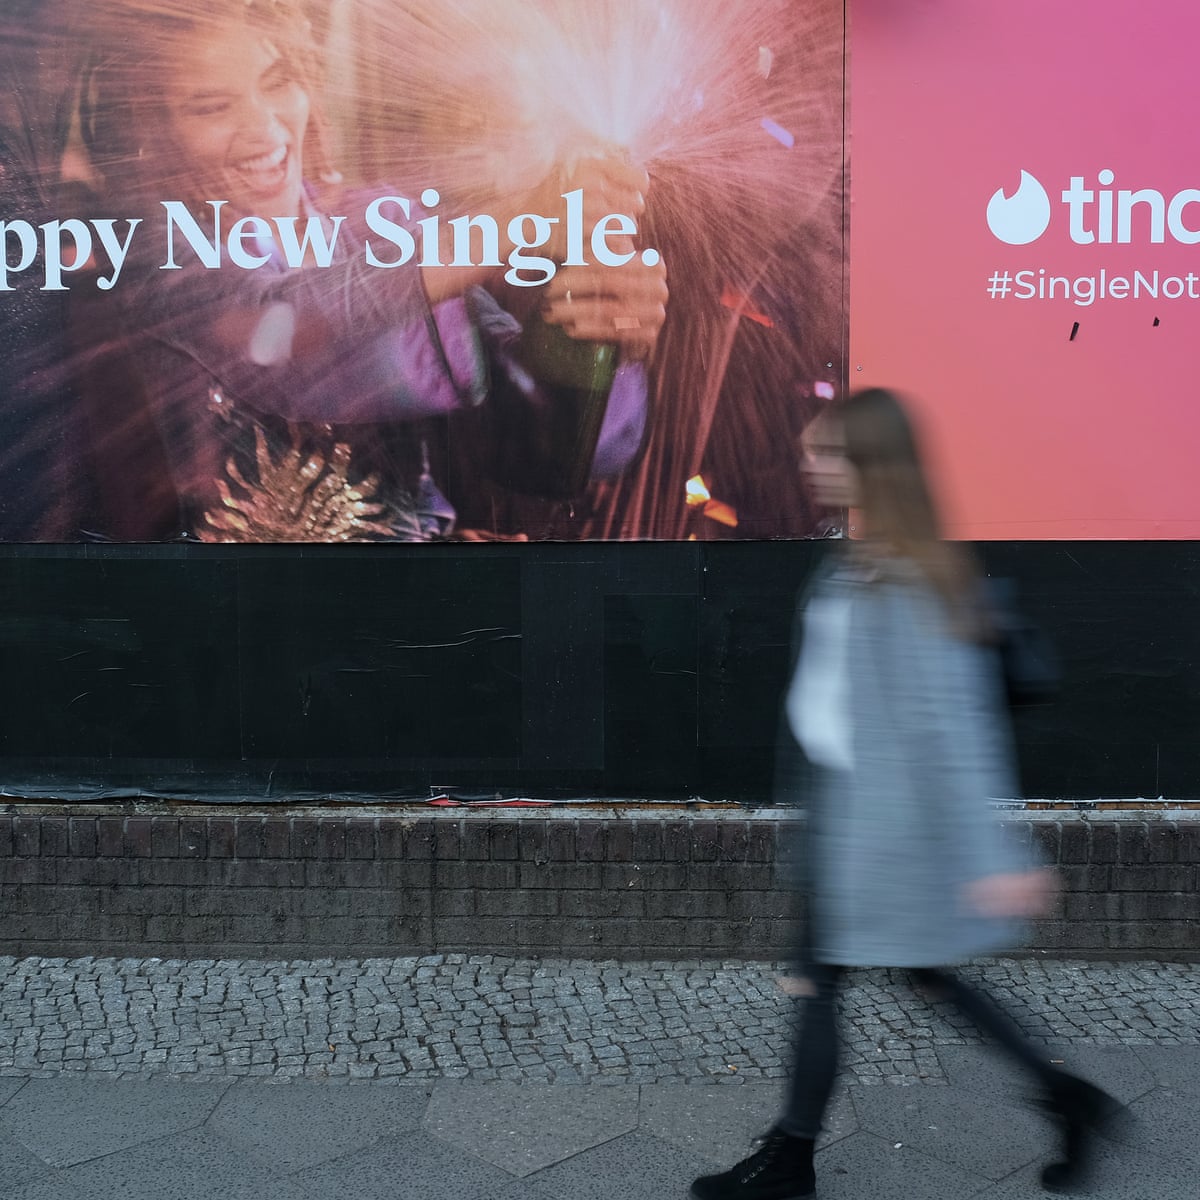 Only application movement but tinder dating not cultural Apps promised